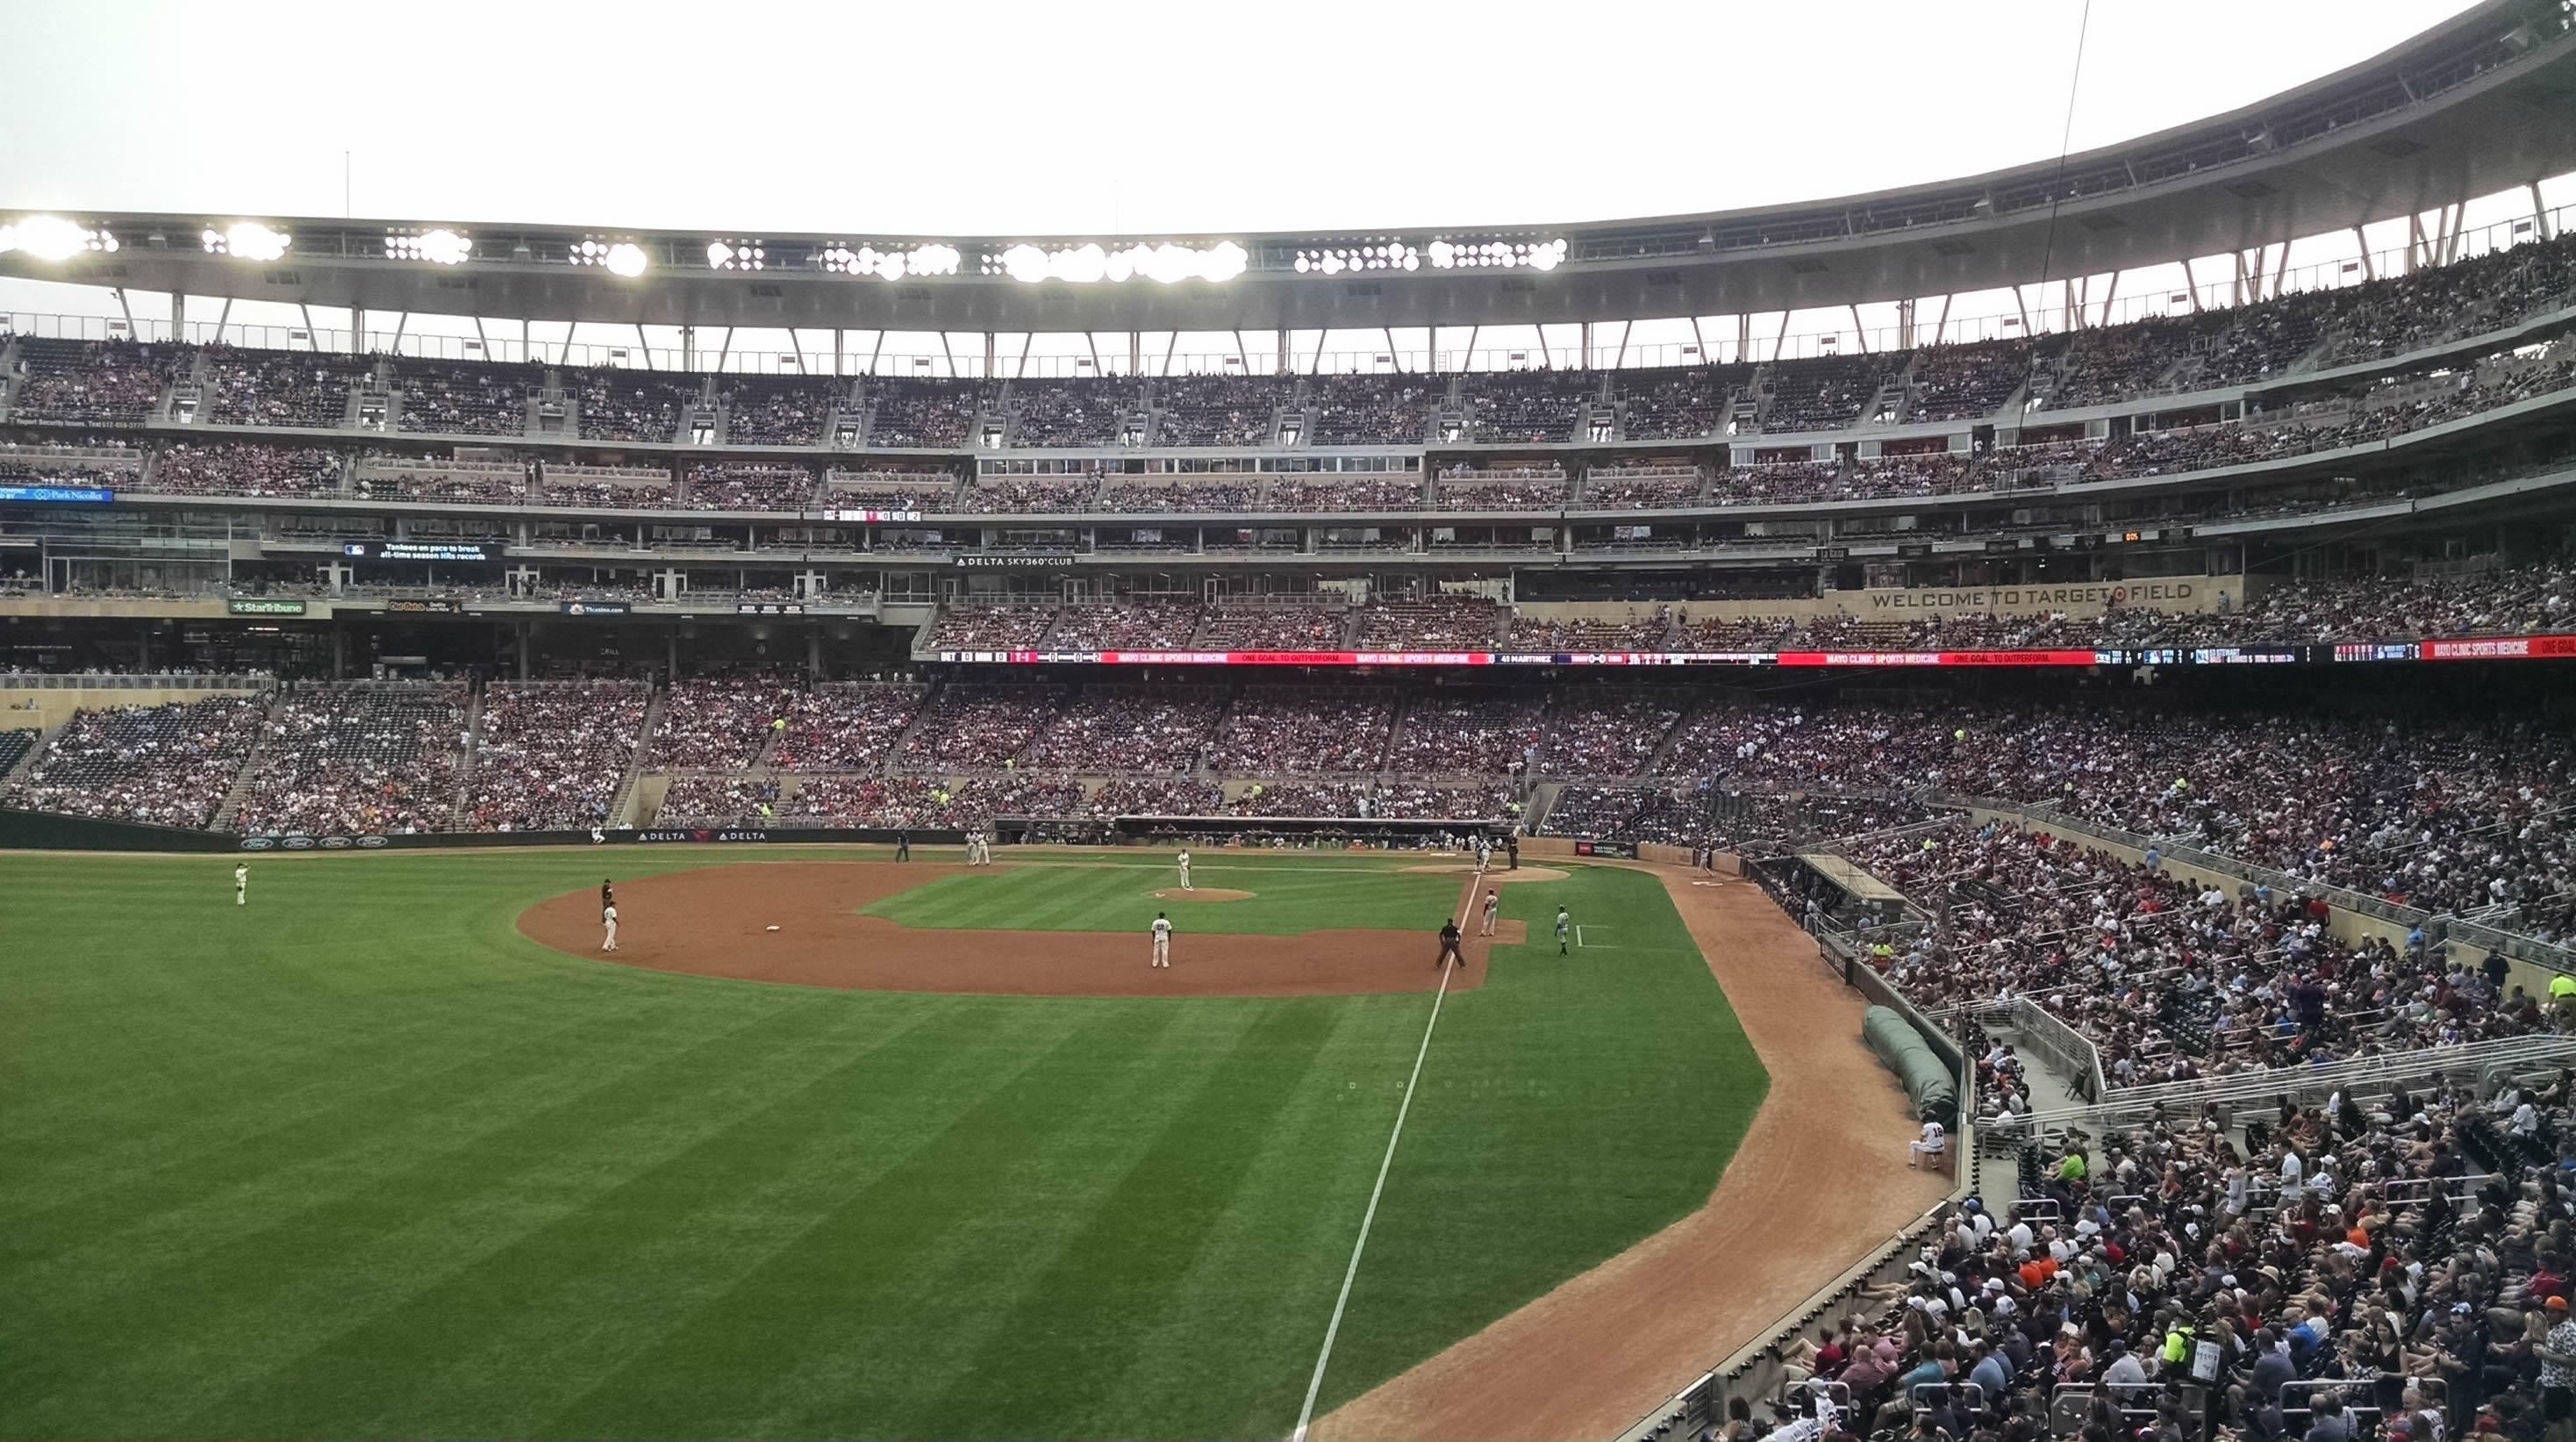 Standing Room Only Tickets at Target Field 